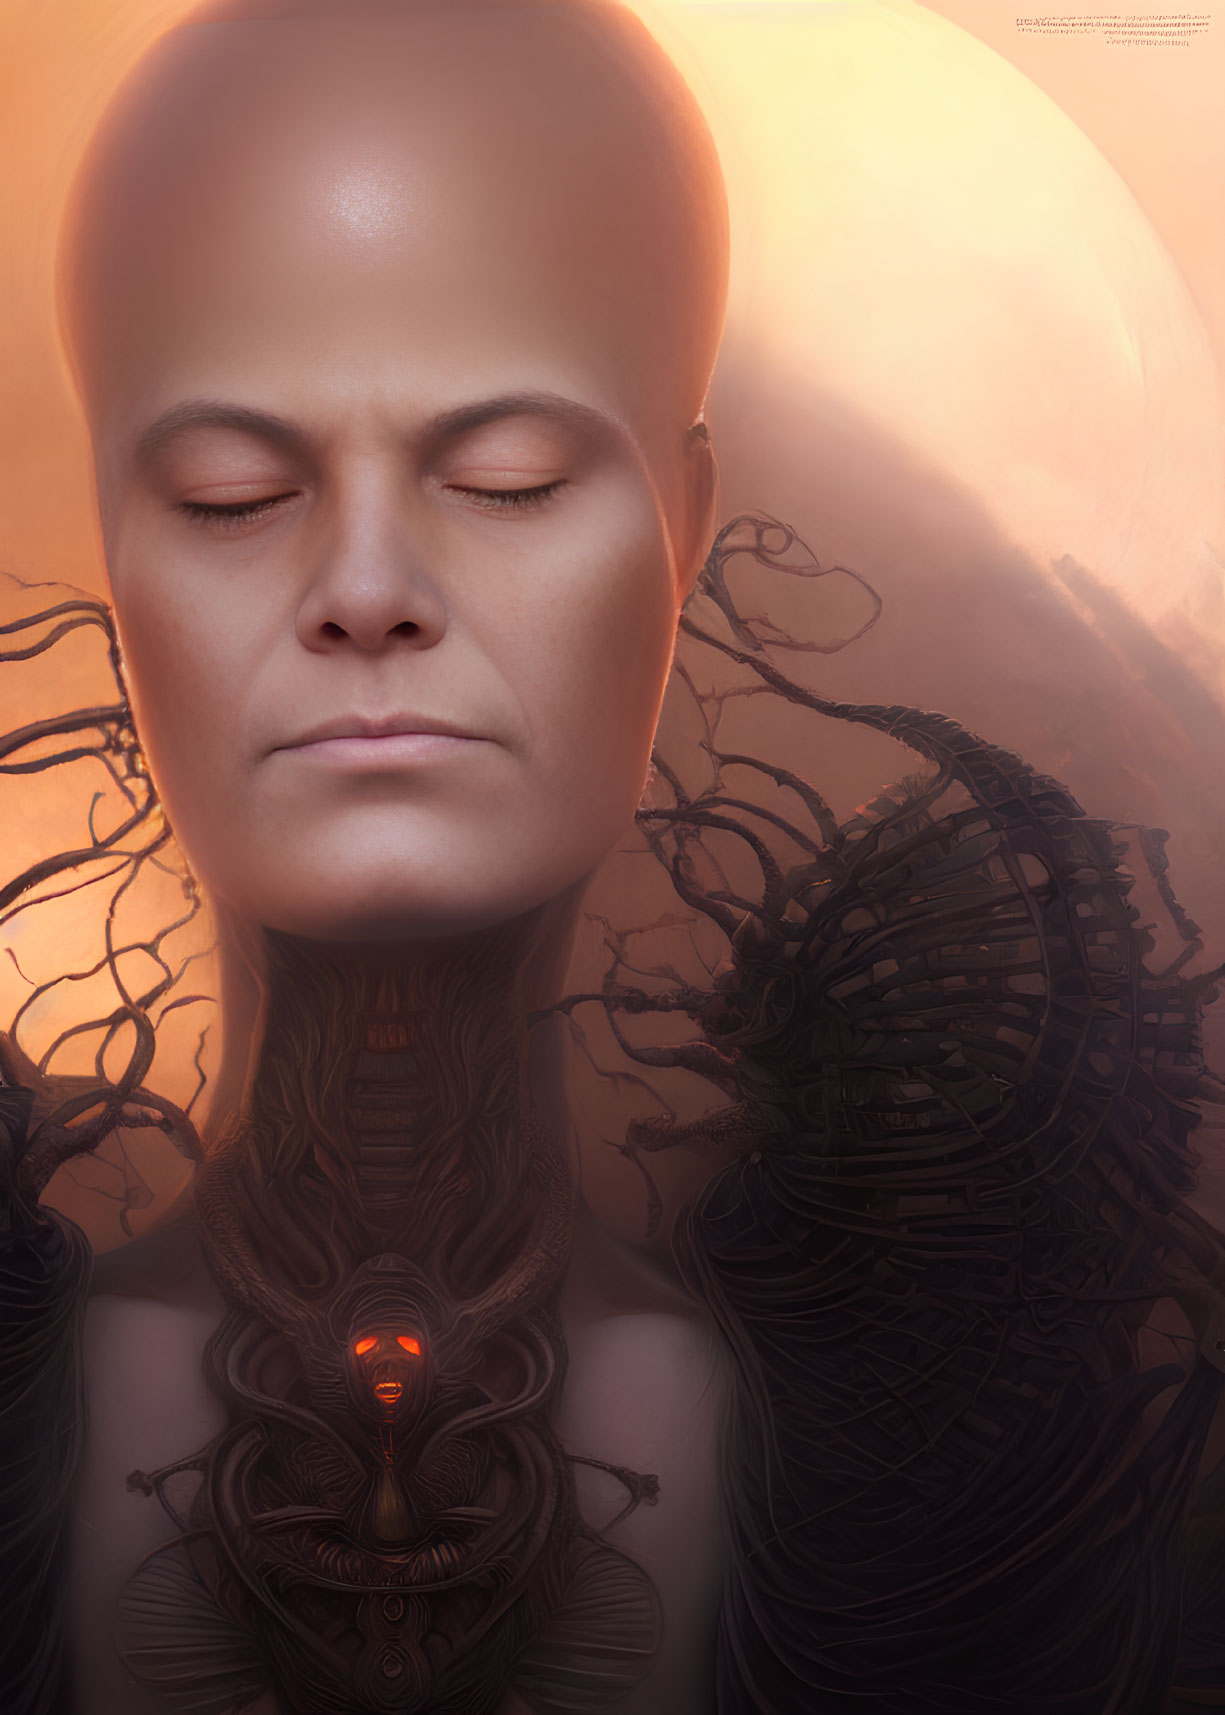 Bald figure with dark neckpiece and glowing red element against warm backdrop.